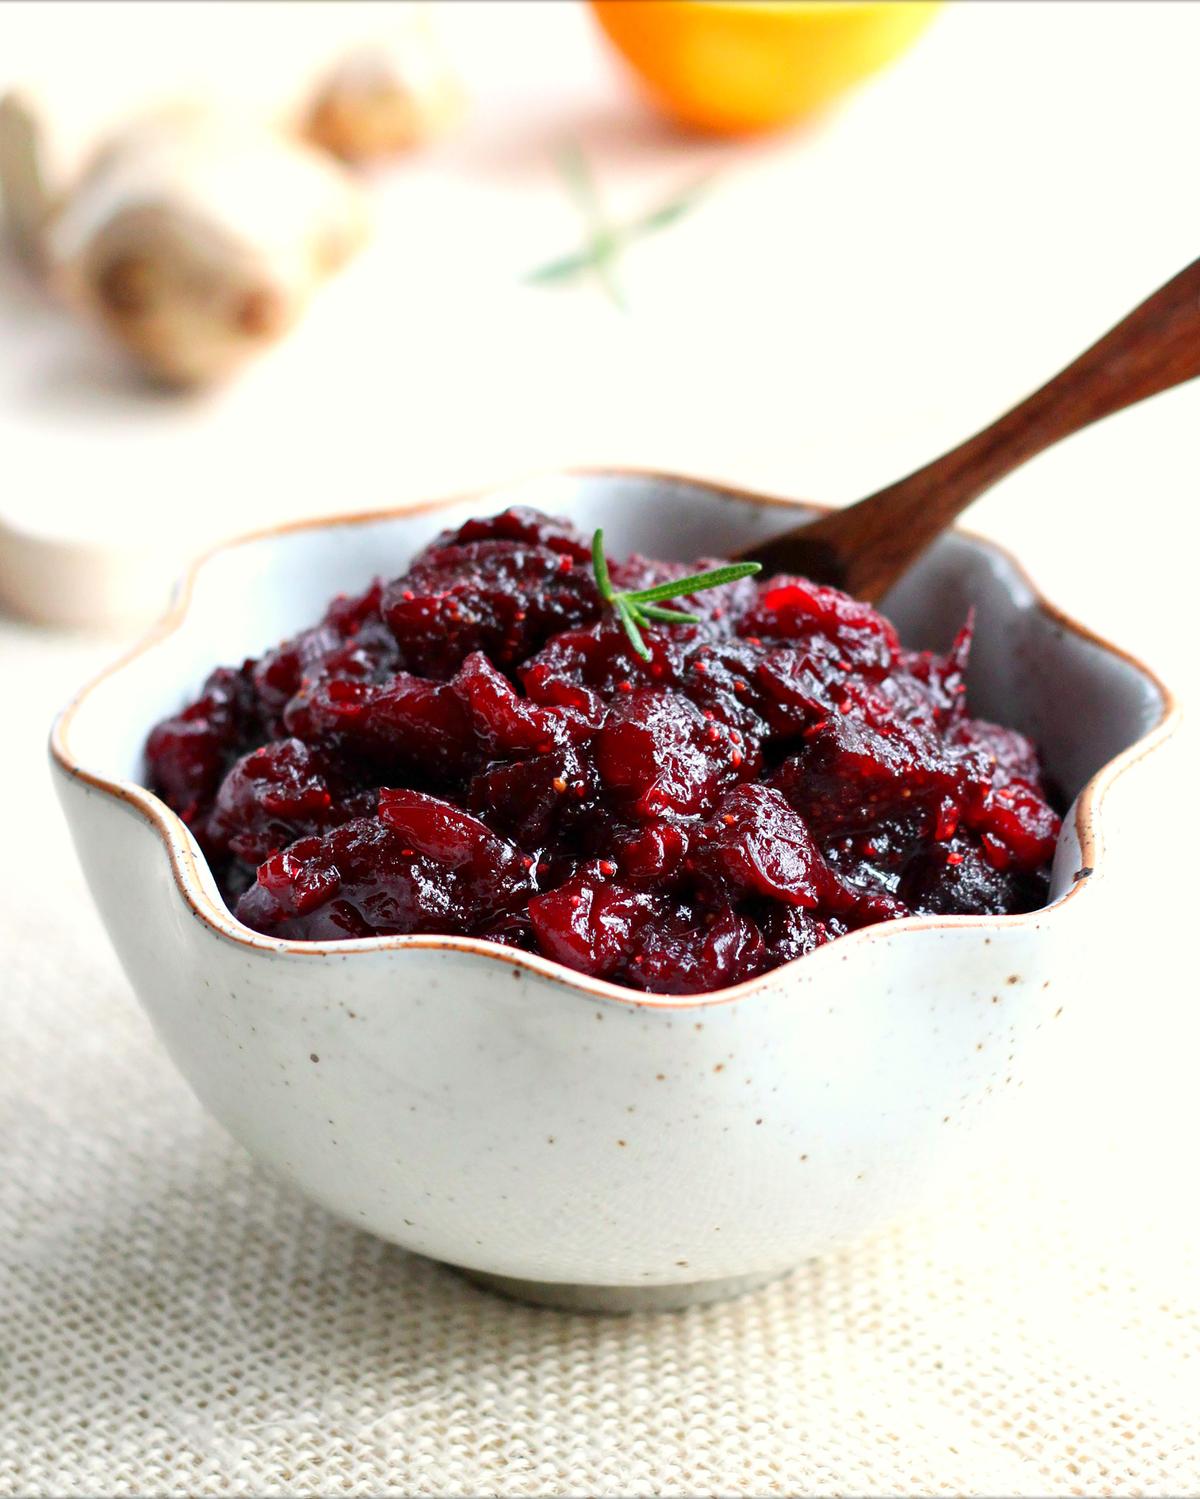 This vibrant chutney combines fresh cranberries and golden raisins with a riot of spices, citrus, and booze. (Lynda Balslev for Tastefood)